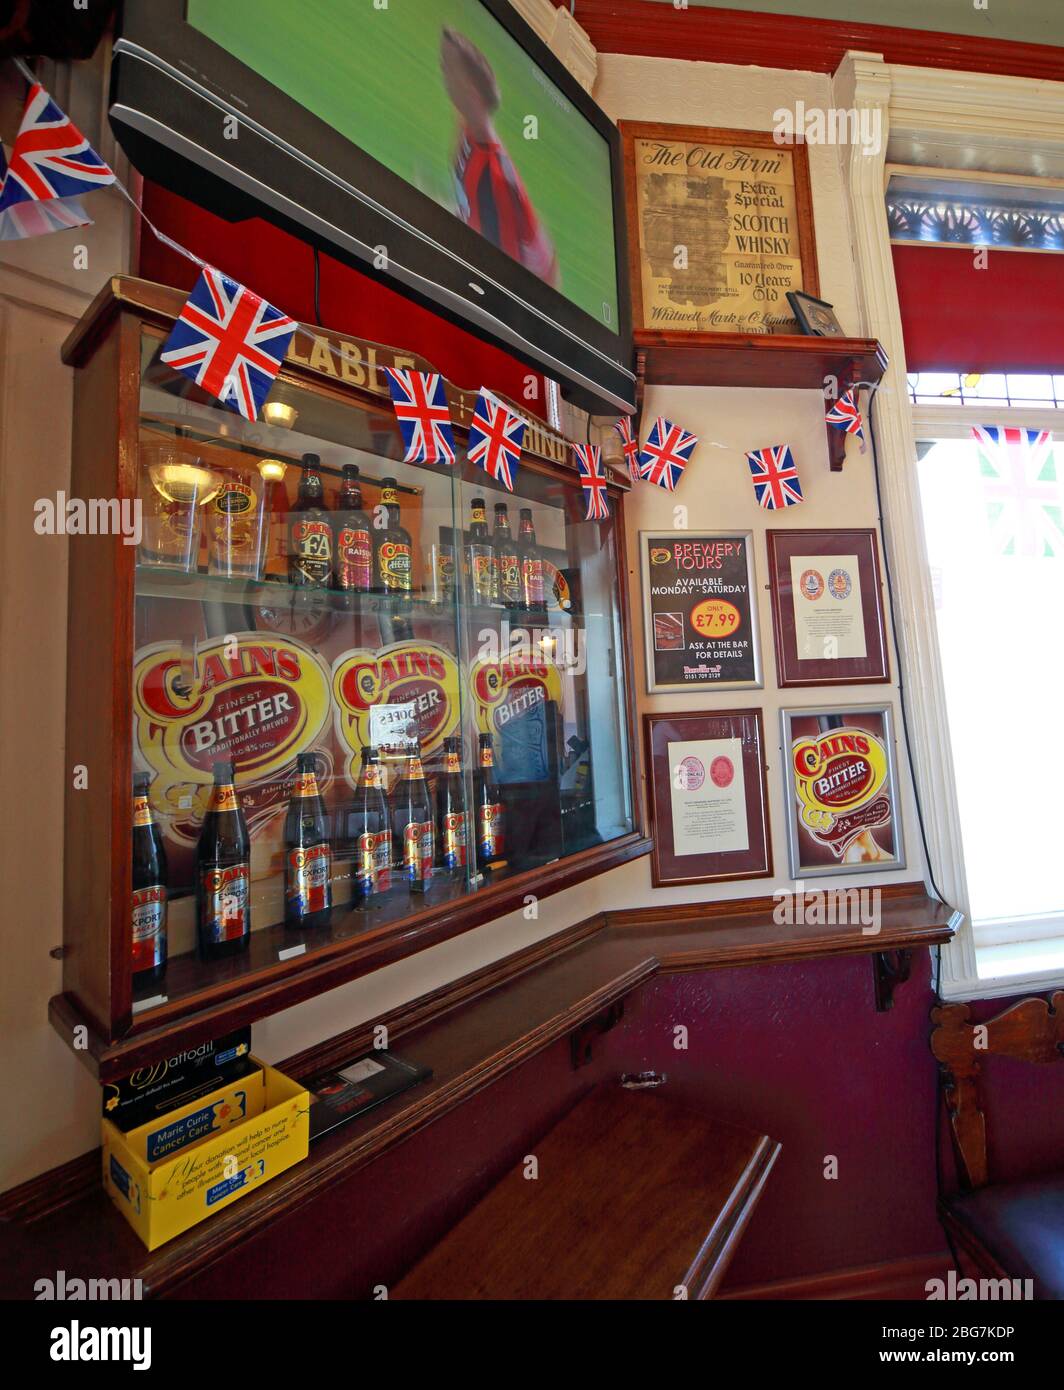 Cains Brewery Tap, Classic British Pub, 39 Stanhope St, Liverpool, Merseyside, Angleterre, Royaume-Uni, L 8 5 RE Banque D'Images